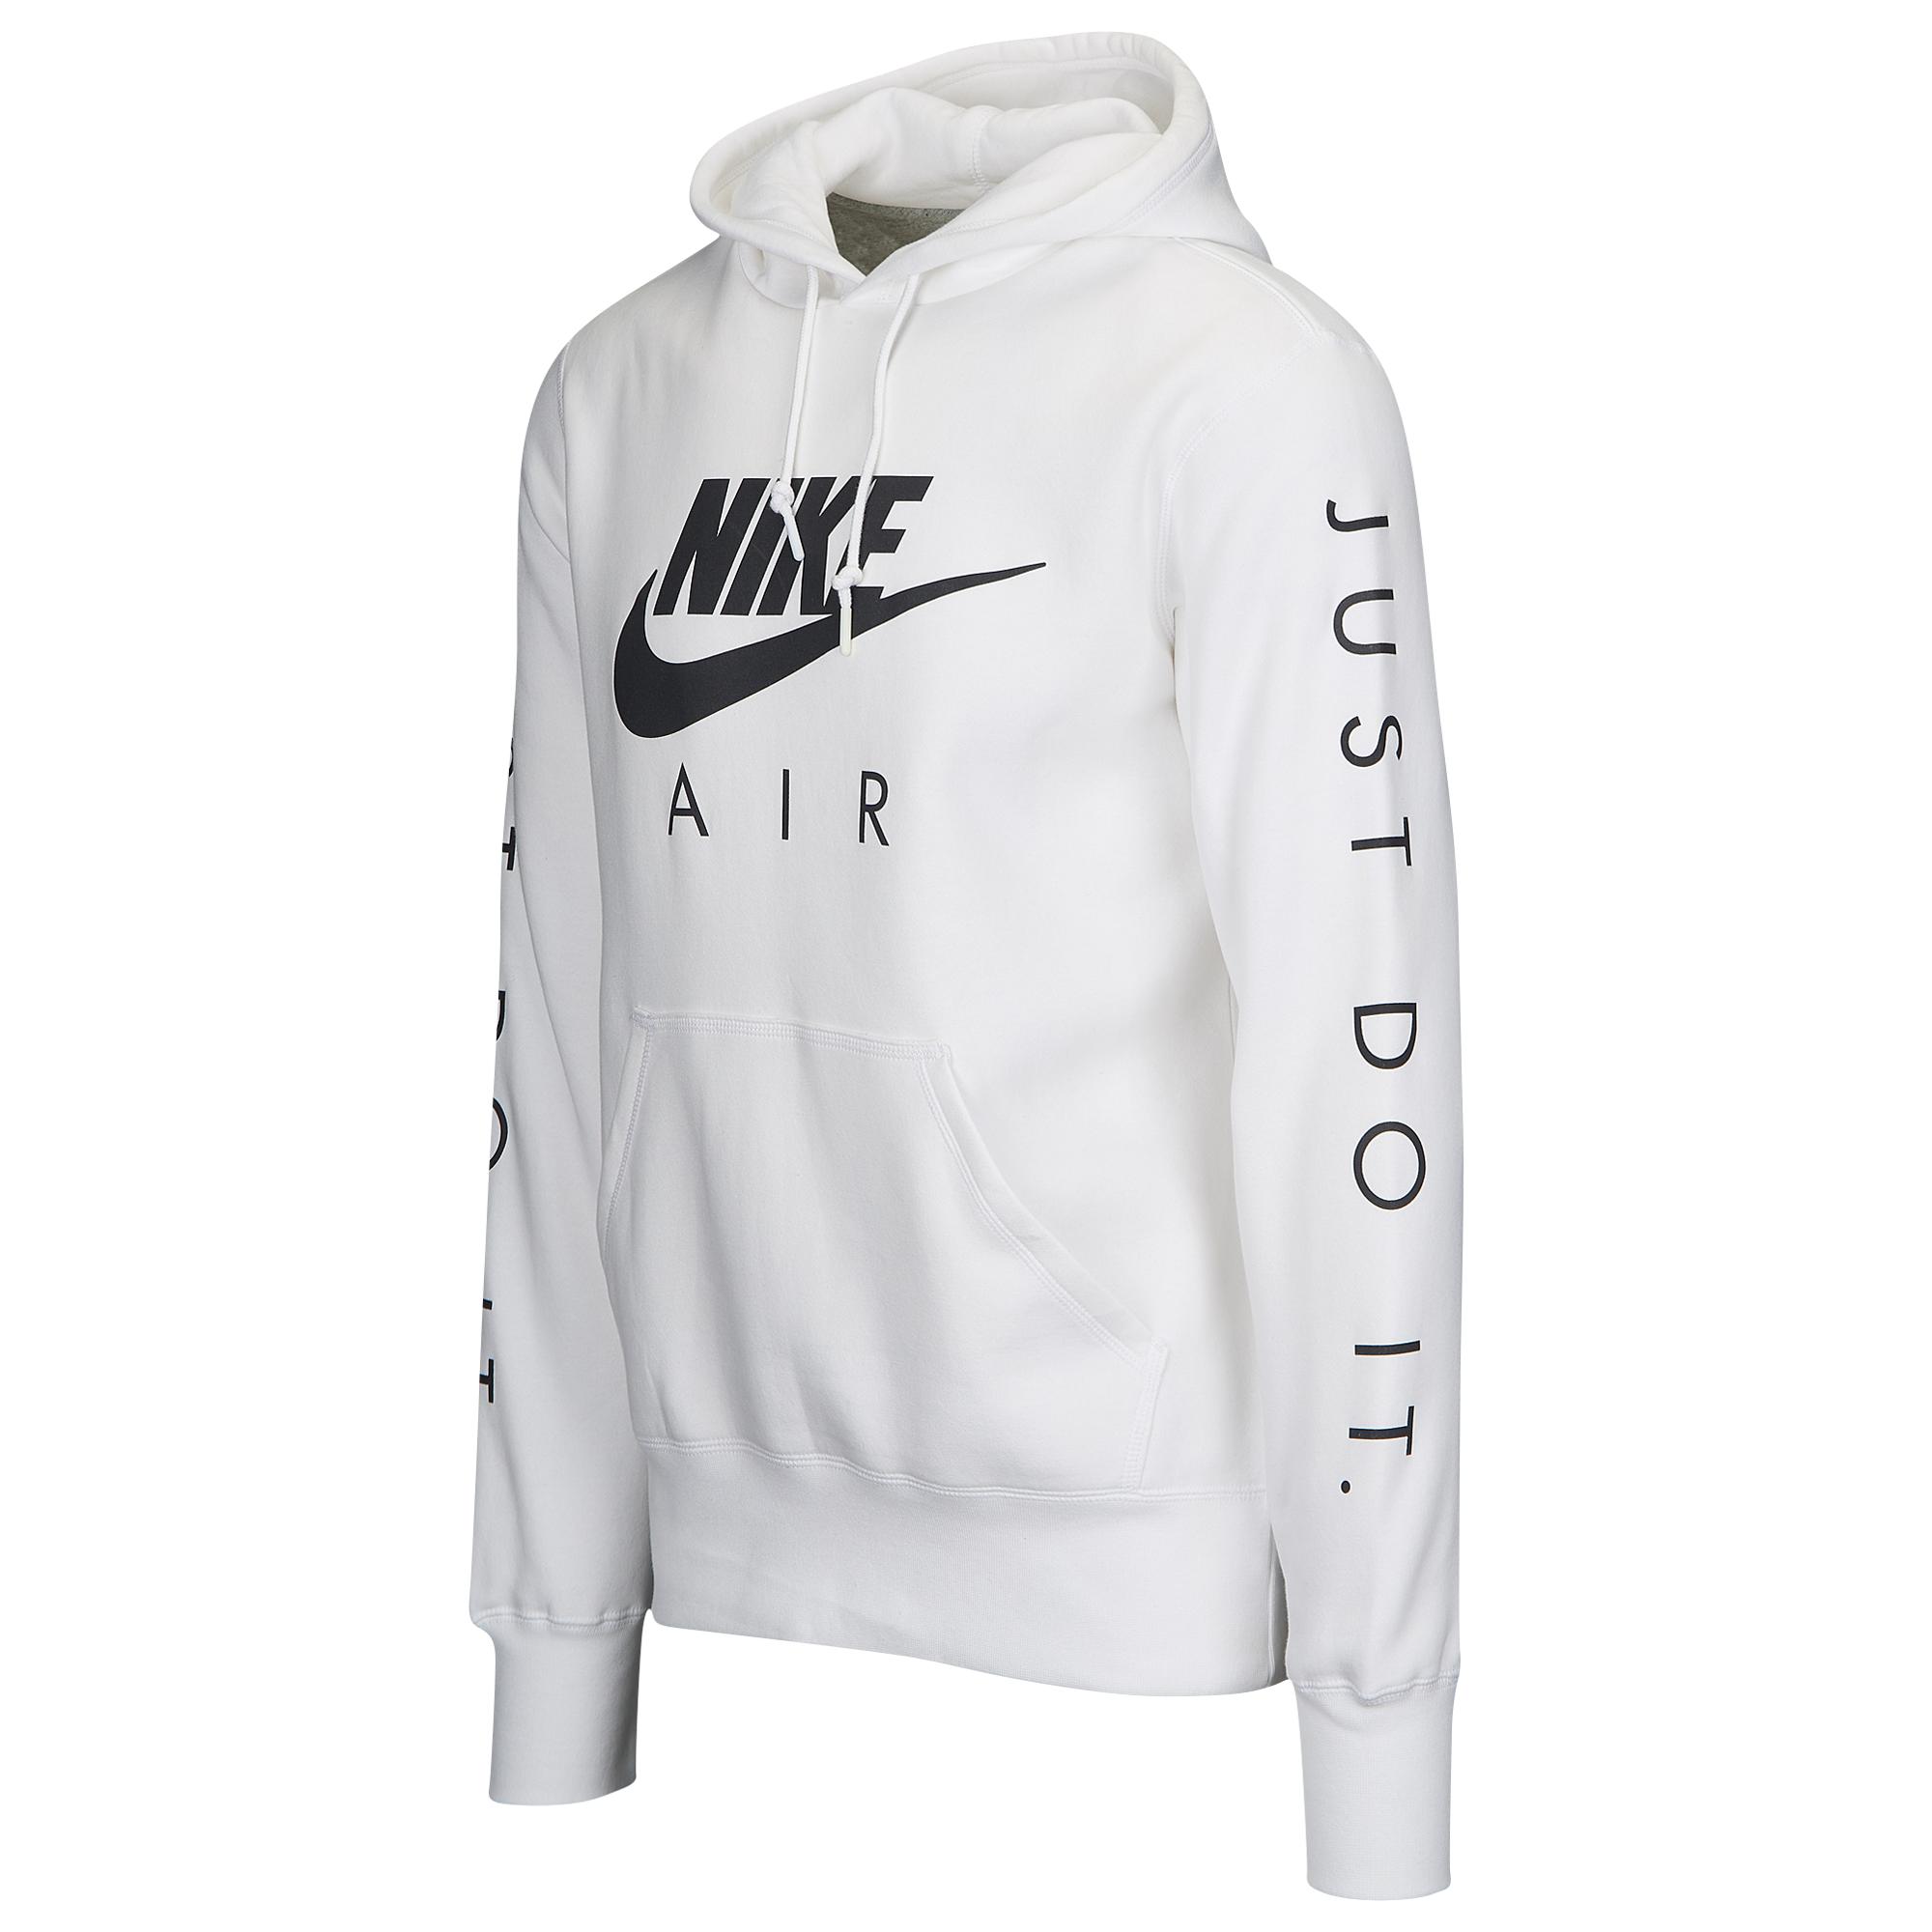 Nike Graphic Hoodie in White for Men - Lyst